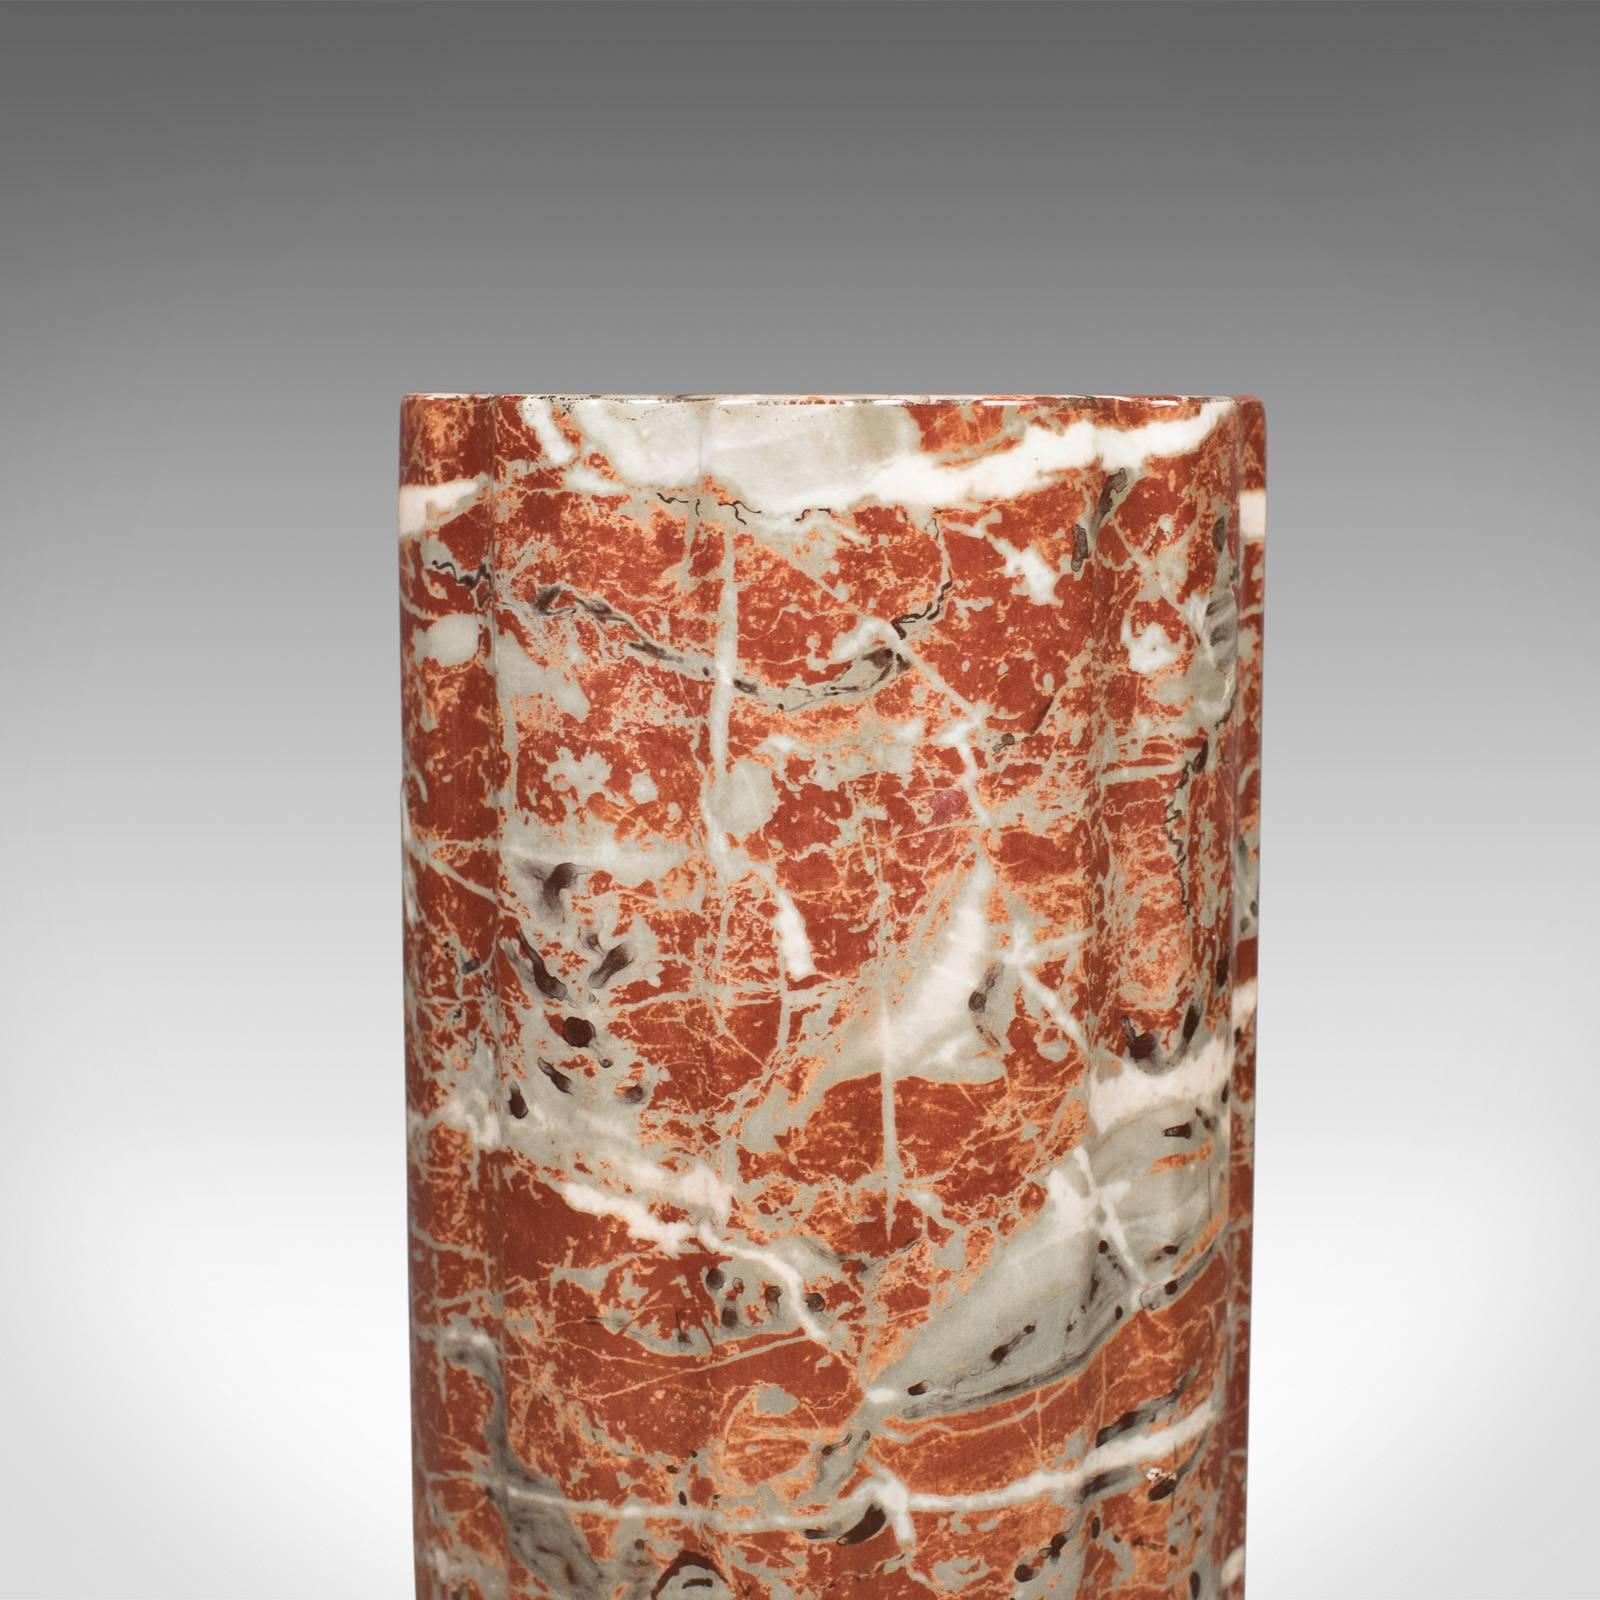 Classical Greek Ceramic Pedestal with Rouge Marble Effect Finish, Late 20th Century Plant Stand